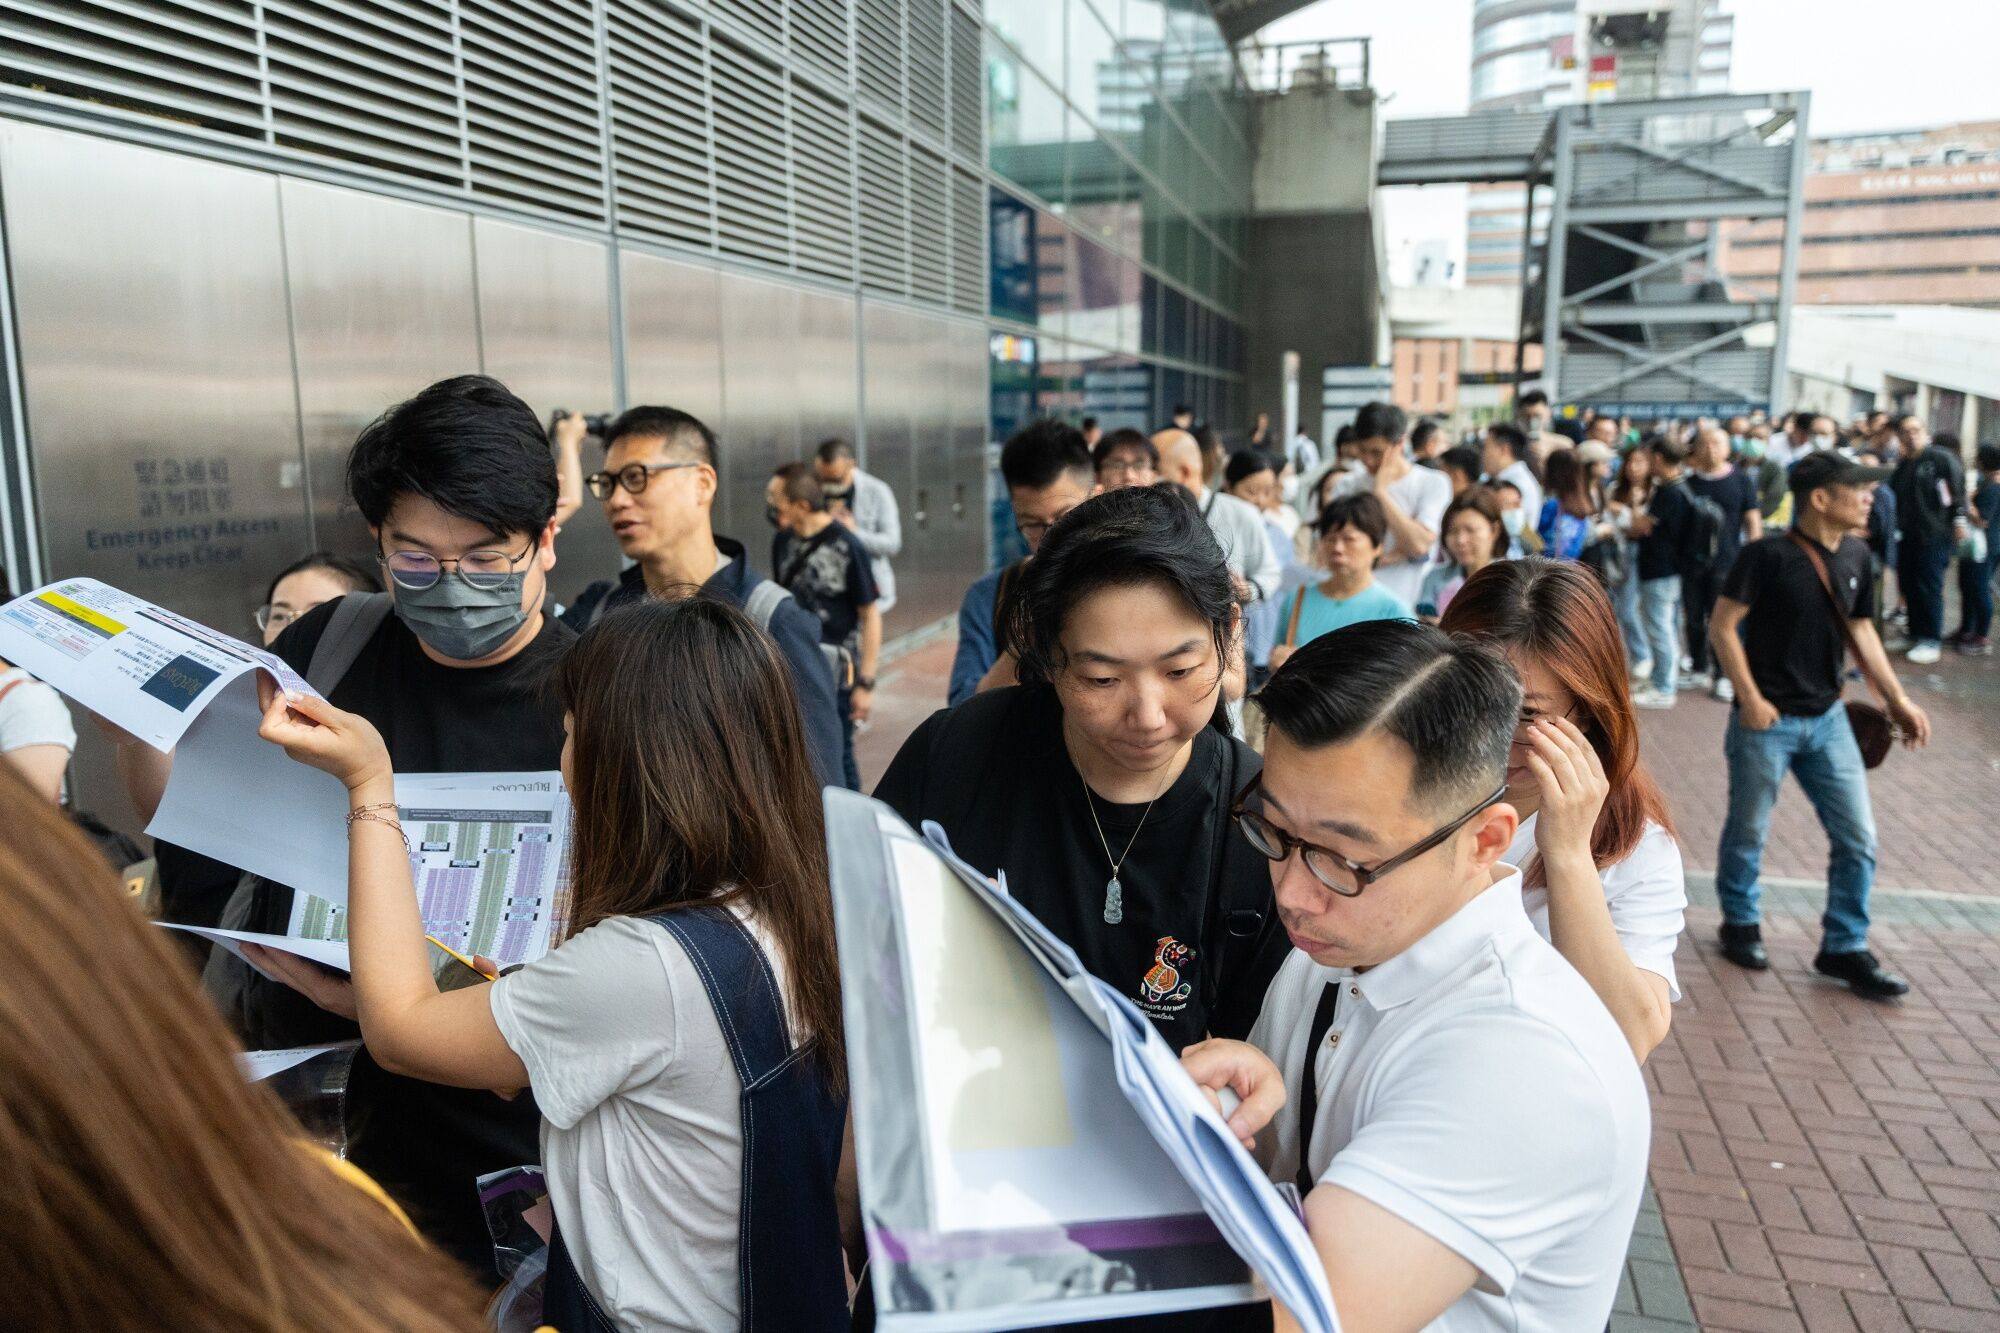 Prospective buyers stand in line outside the sales office of a housing project in Hong Kong on April 6. The prospect of interest rates staying higher for longer will induce developers to keep pricing their units at a discount, helping underpin the revival in demand. Photo: Bloomberg